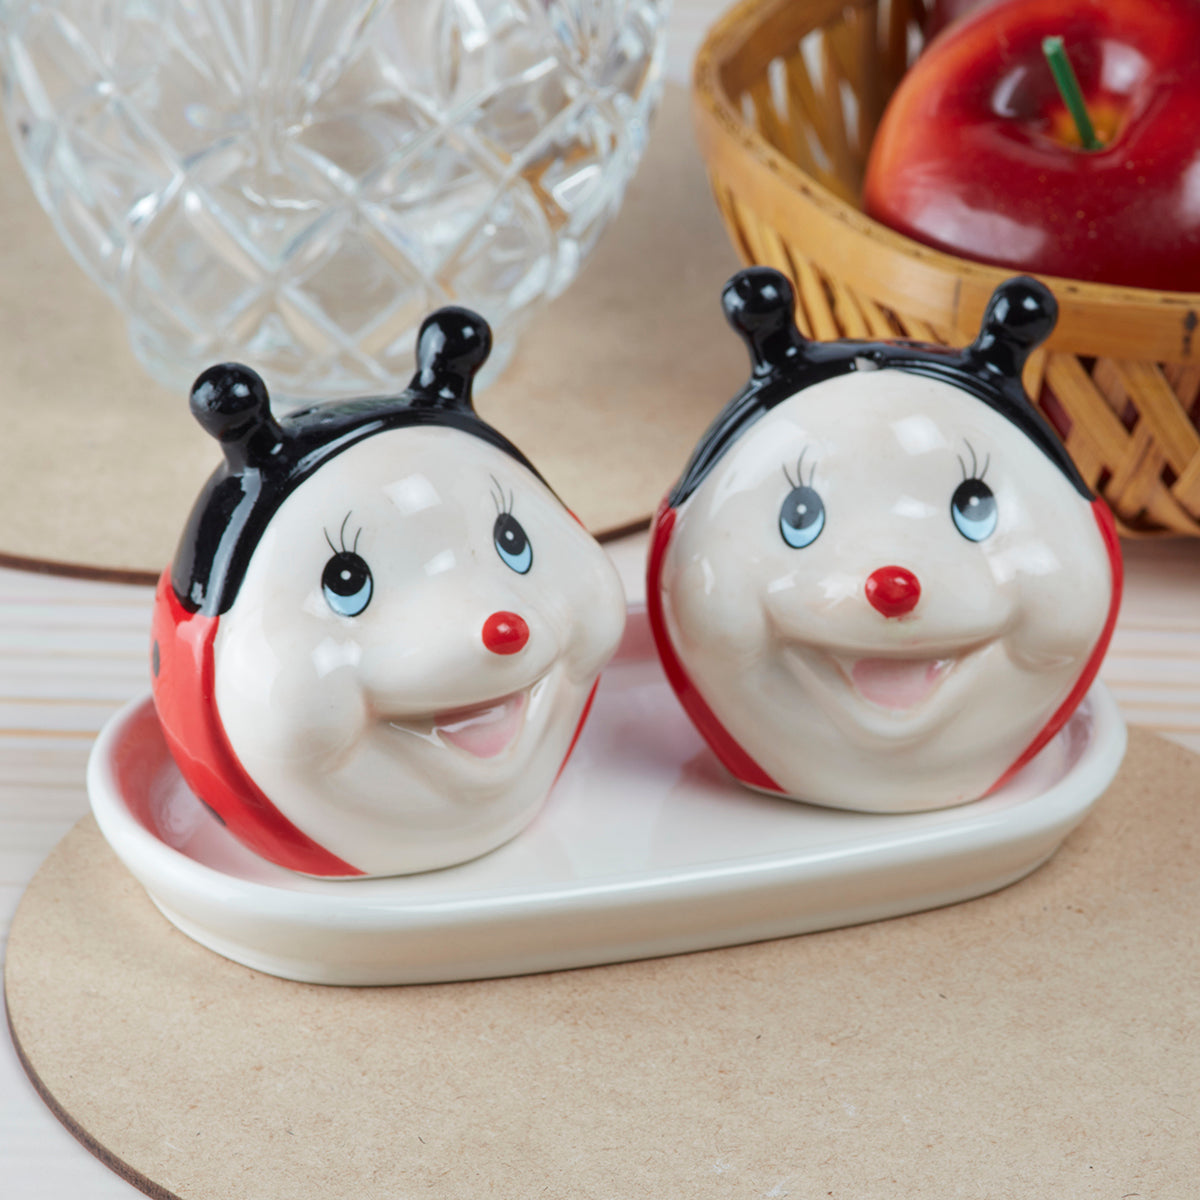 Ceramic Salt and Pepper Set with tray, Lady Bug Design, Red Black (8568)